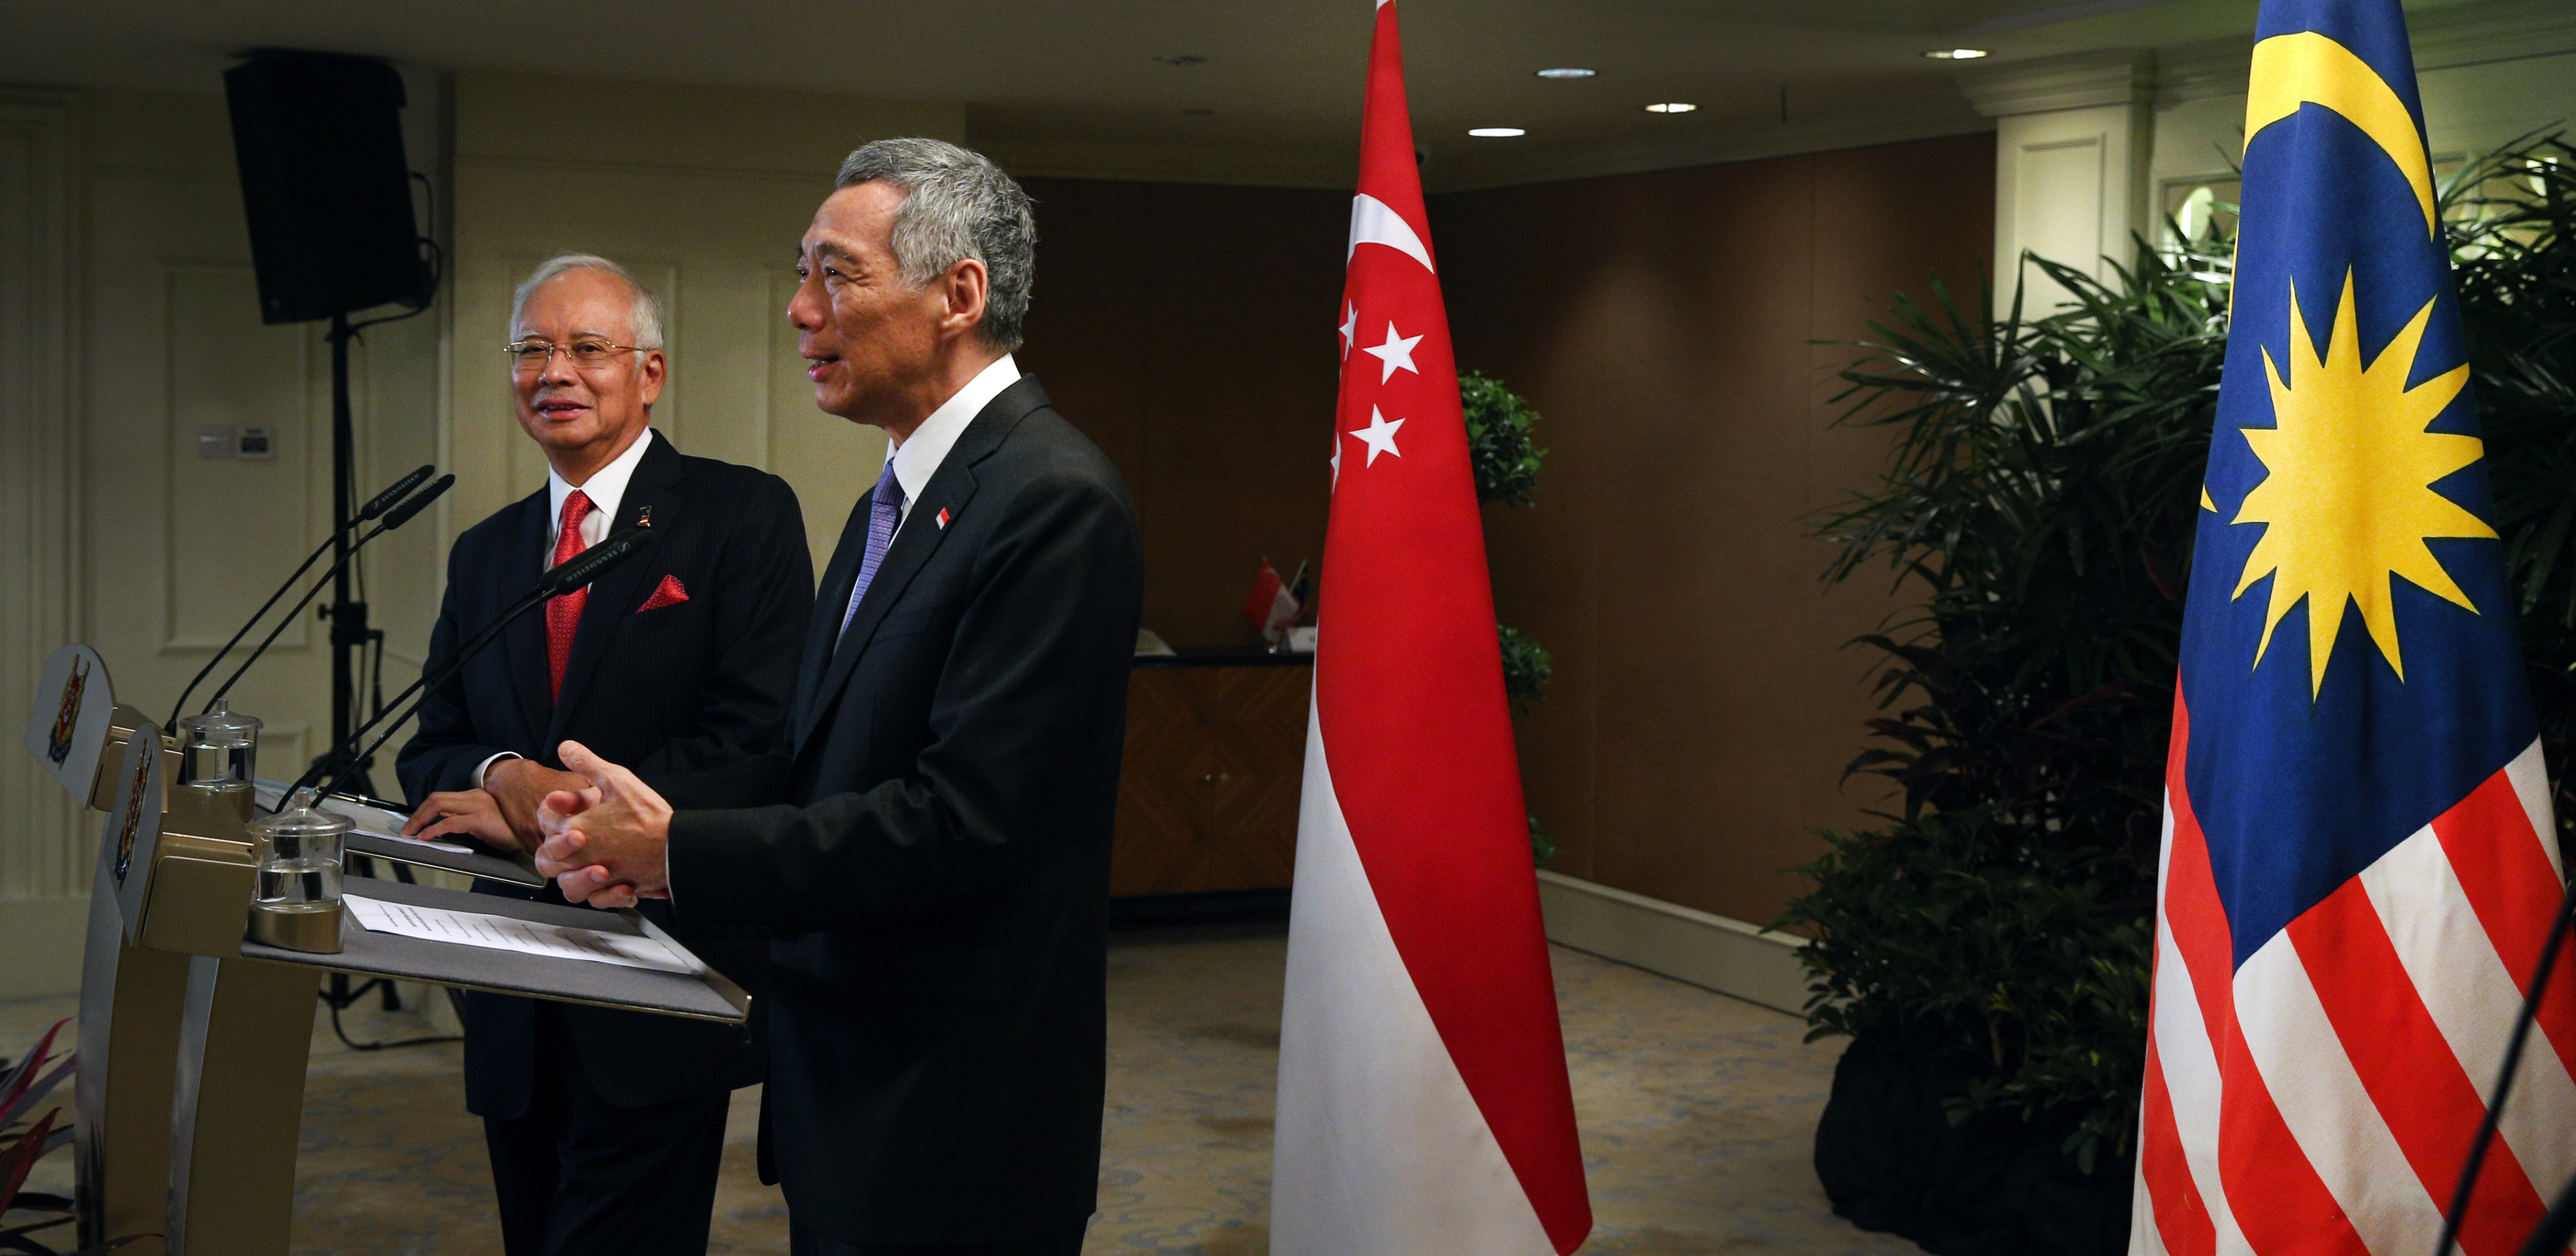 Singapore-Malaysia Leaders' Retreat Press Conference on 5 May 2015 (MCI Photo by Terence Tan)